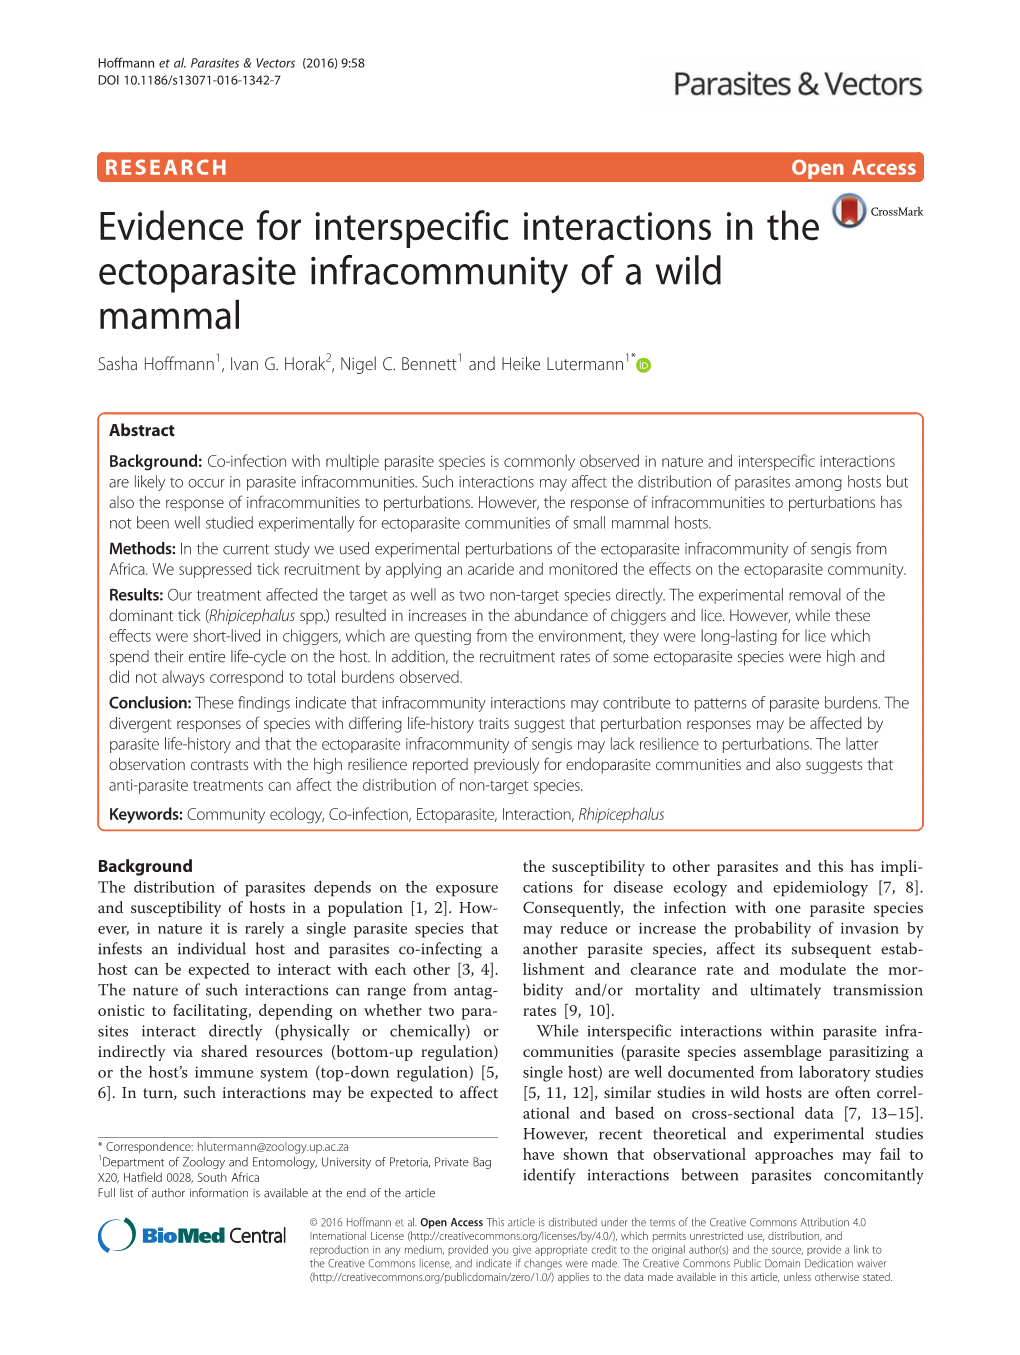 Evidence for Interspecific Interactions in the Ectoparasite Infracommunity of a Wild Mammal Sasha Hoffmann1, Ivan G